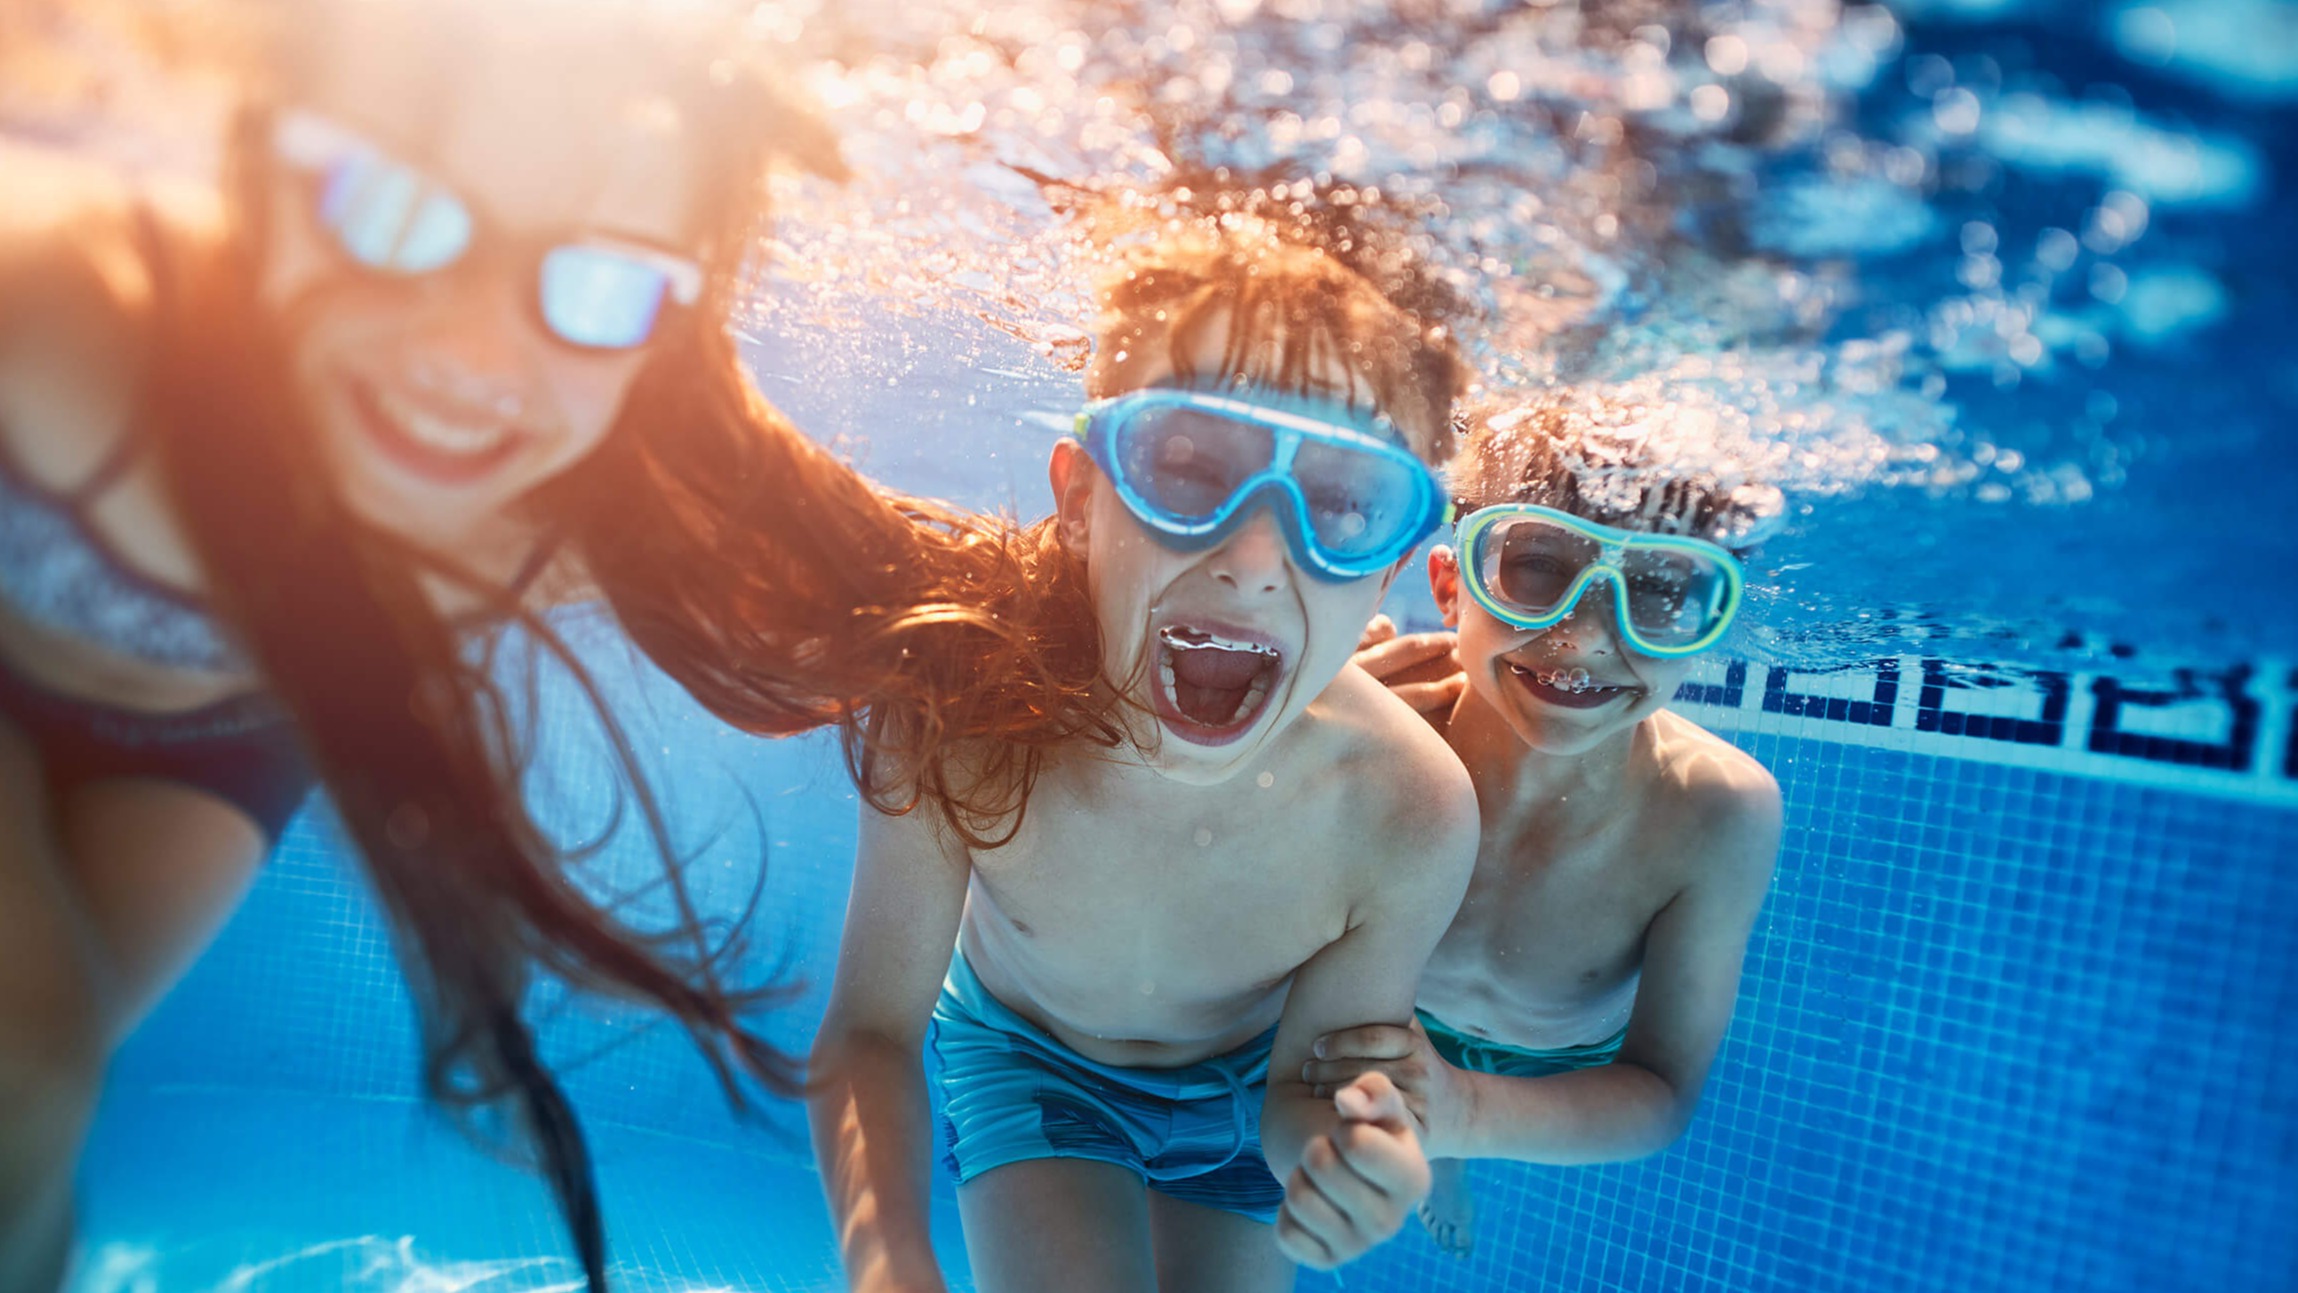 Children wearing goggles playing under water in the pool.